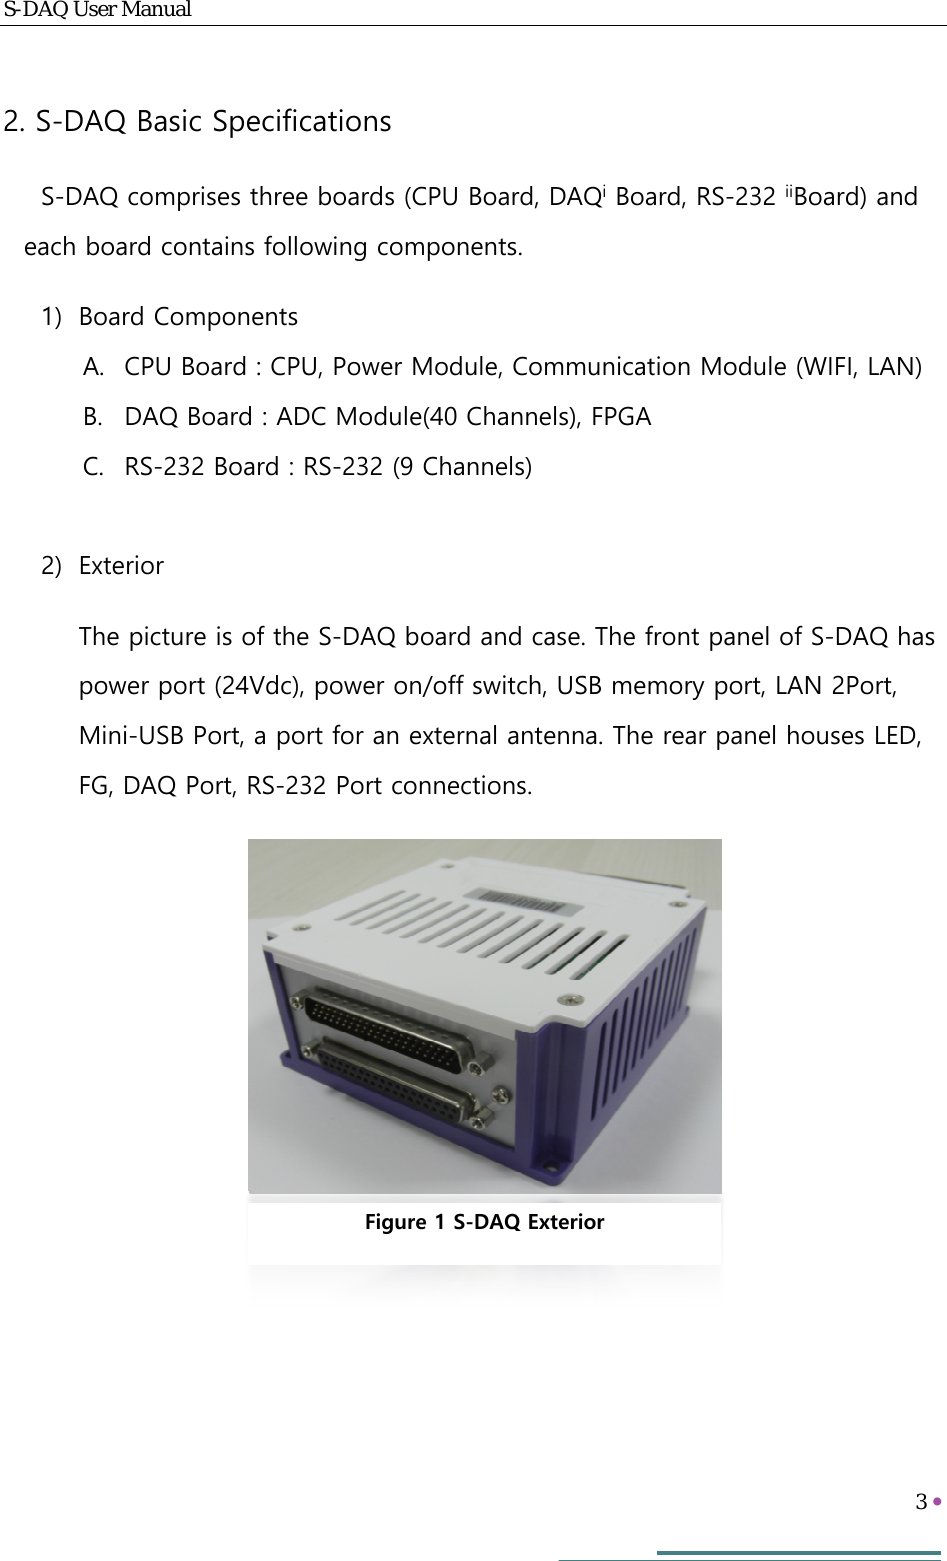 S-DAQ User Manual   3     2. S-DAQ Basic Specifications S-DAQ comprises three boards (CPU Board, DAQi Board, RS-232 iiBoard) and each board contains following components. 1) Board Components A. CPU Board : CPU, Power Module, Communication Module (WIFI, LAN) B. DAQ Board : ADC Module(40 Channels), FPGA C. RS-232 Board : RS-232 (9 Channels)  2) Exterior The picture is of the S-DAQ board and case. The front panel of S-DAQ has power port (24Vdc), power on/off switch, USB memory port, LAN 2Port, Mini-USB Port, a port for an external antenna. The rear panel houses LED, FG, DAQ Port, RS-232 Port connections.          Figure 1 S-DAQ Exterior